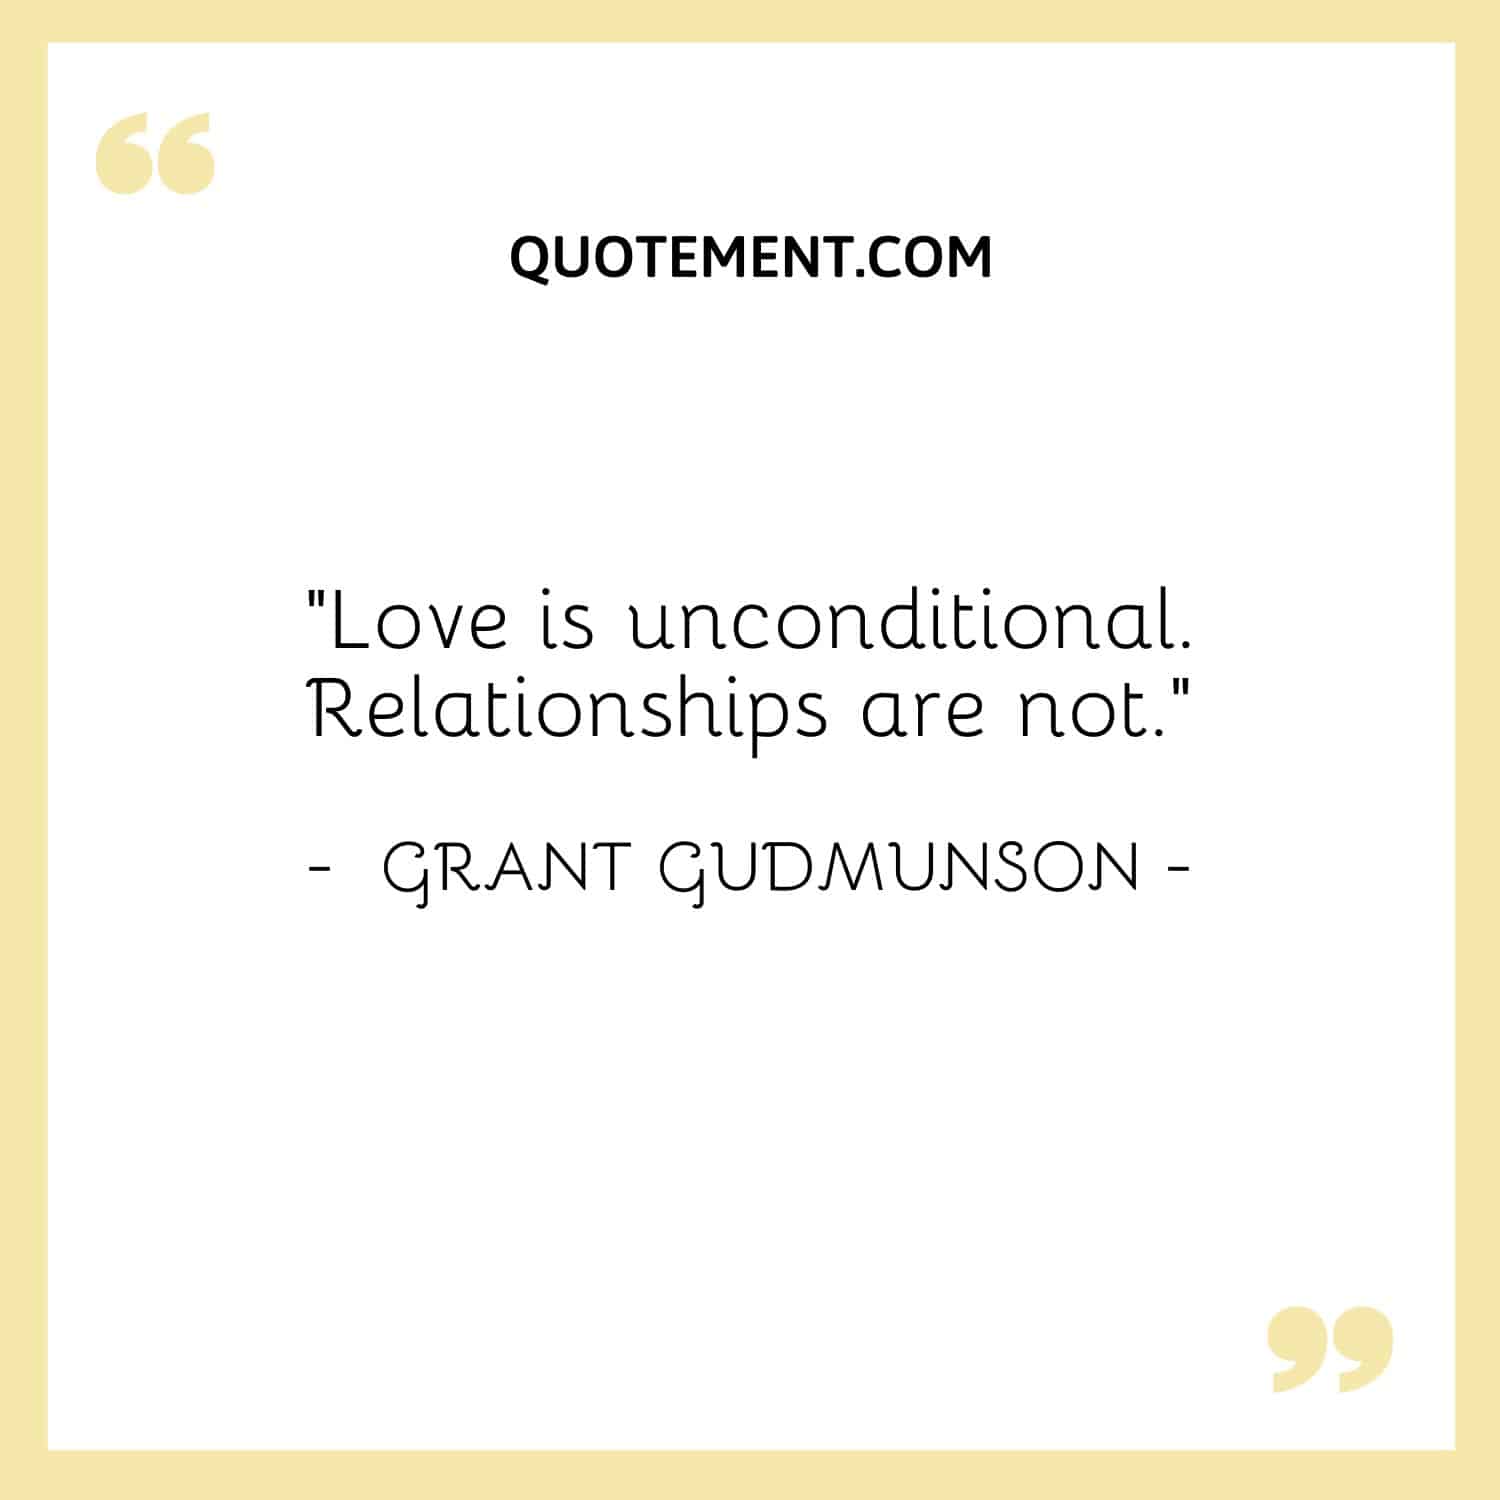 Love is unconditional. Relationships are not